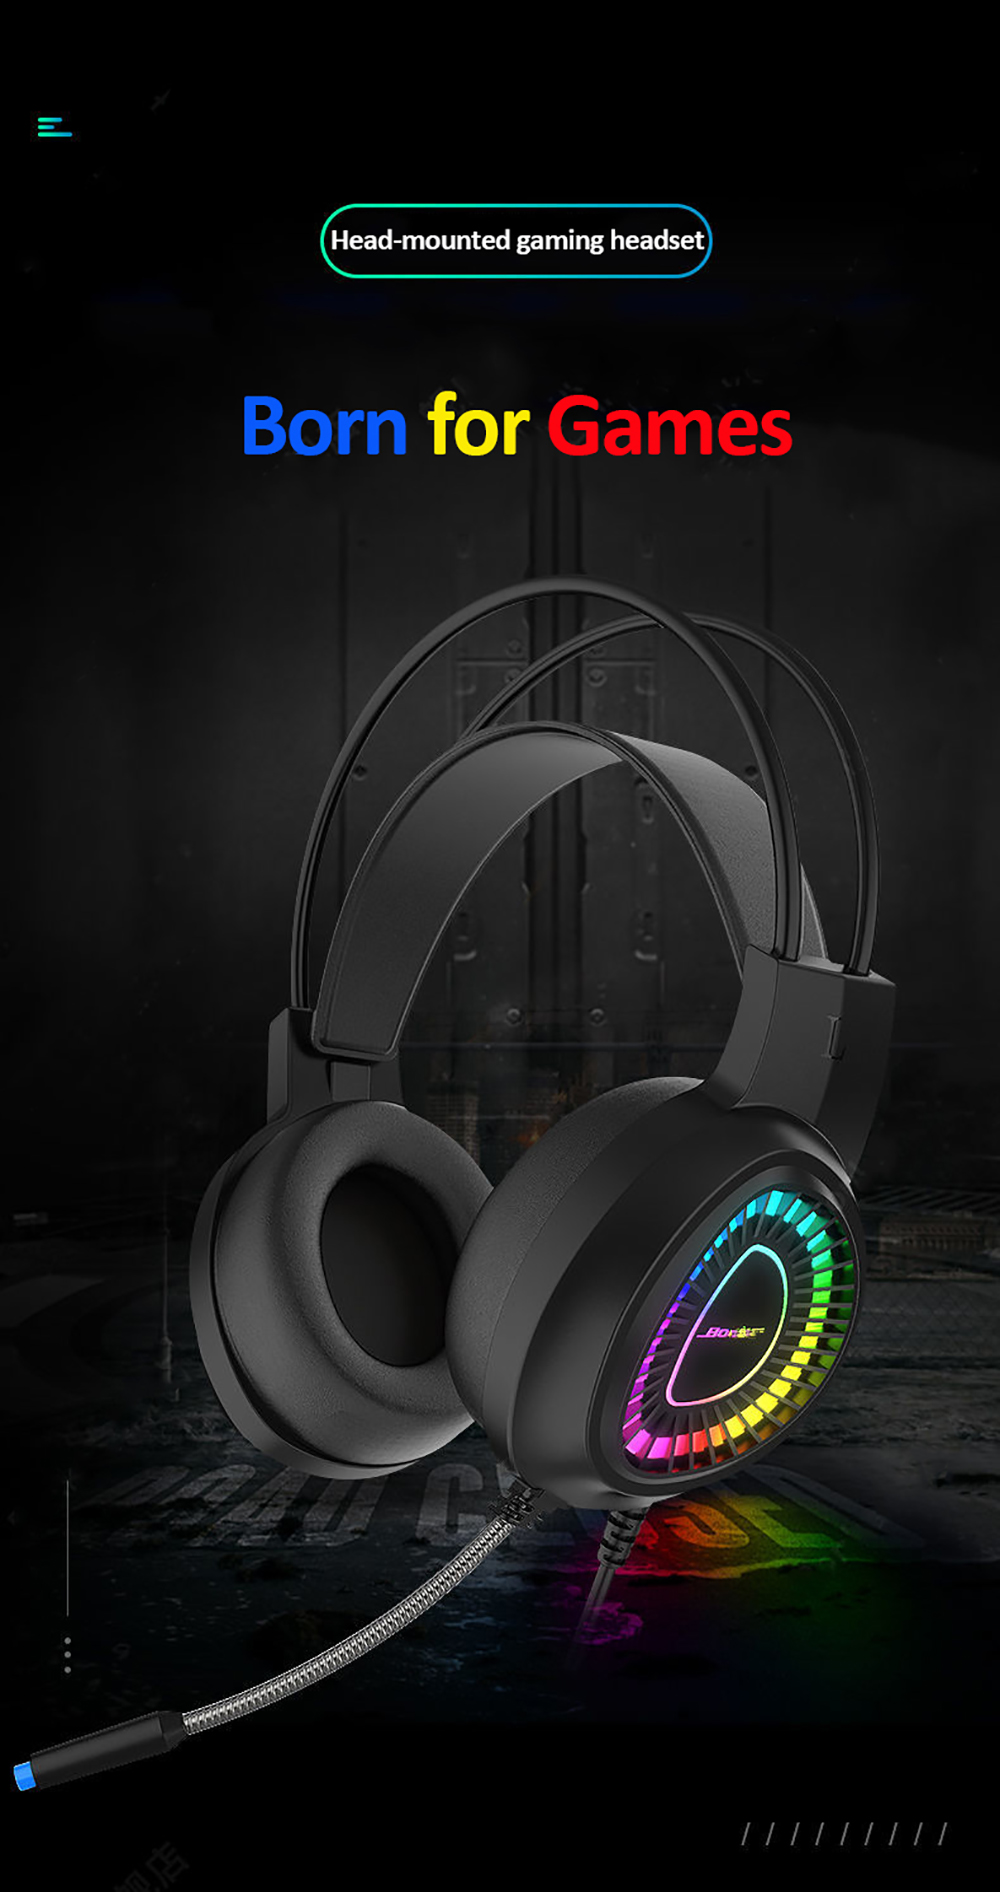 Bonks-G3-Virtual-71-Channel-Gaming-Headset--RGB-Backlight-Surround-Stereo-Headphone-With-Microphone--1813802-1